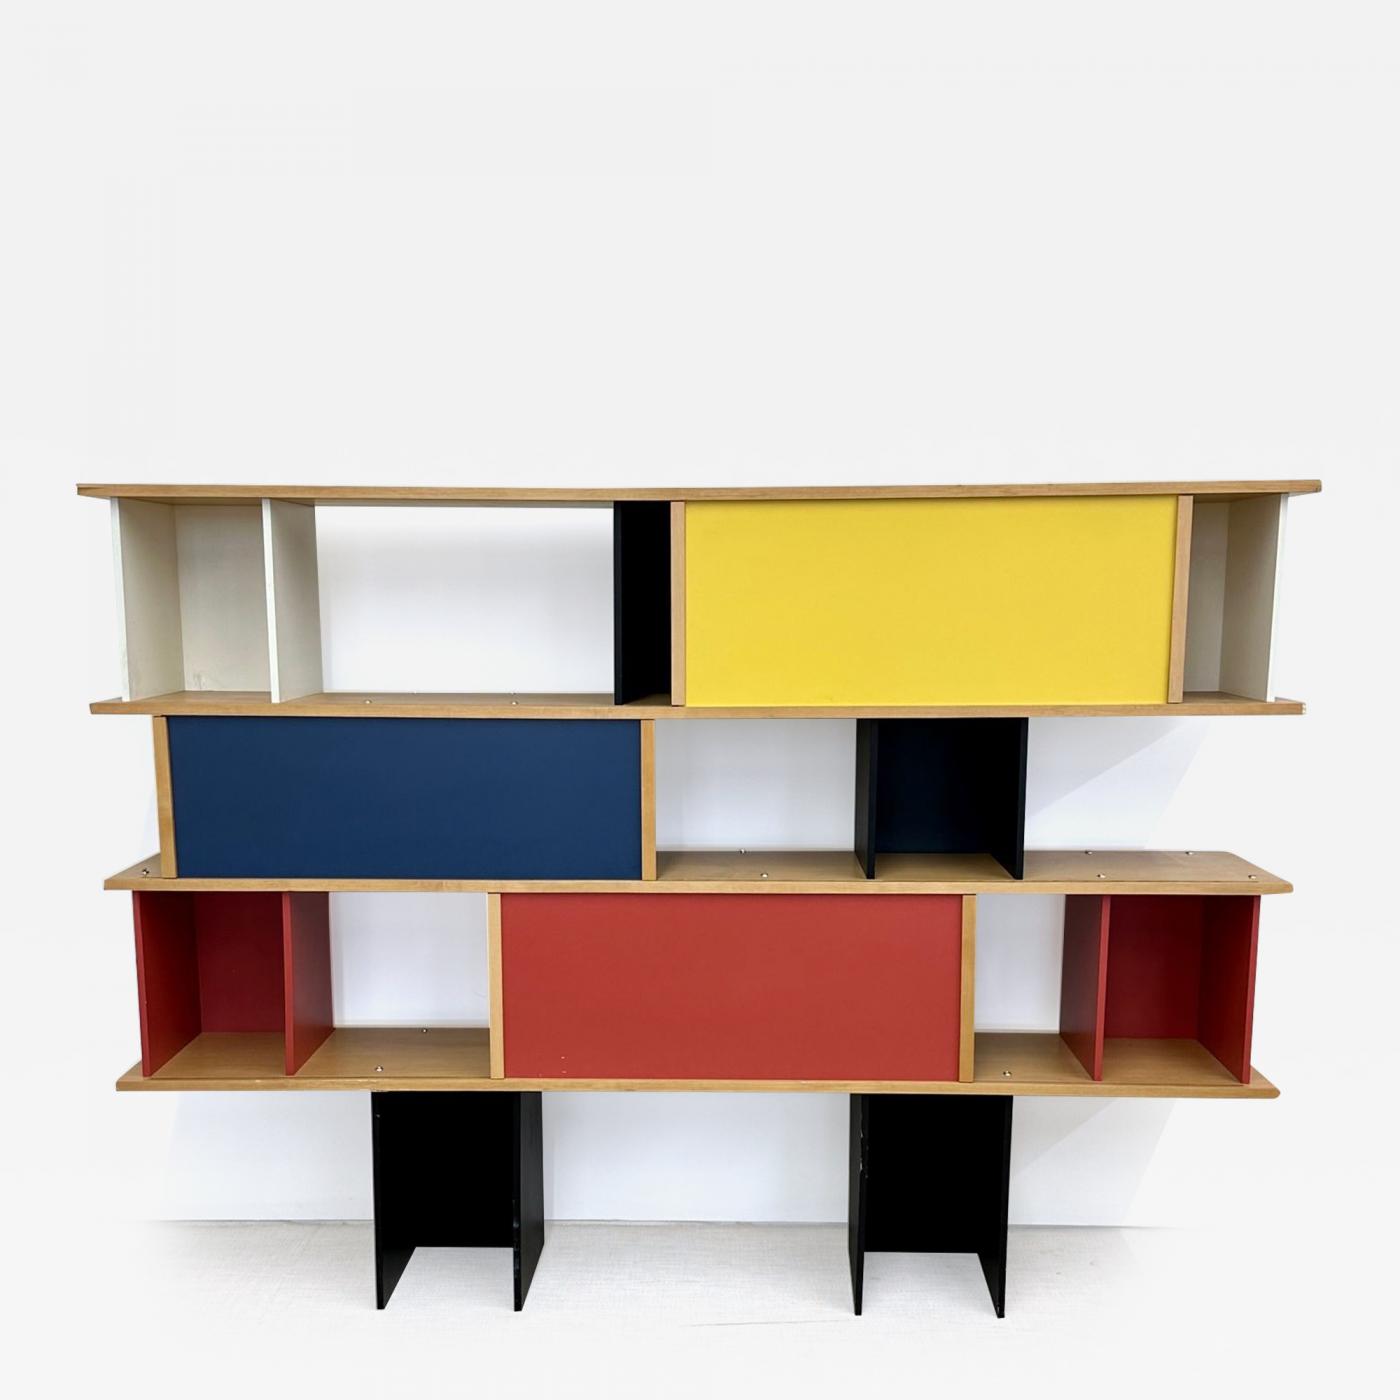 https://cdn.incollect.com/sites/default/files/zoom/Mid-Century-Modern-Style-Shelving-Unit-Bookcase-Manner-Perriand-Room-Divider-595231-2812852.jpg